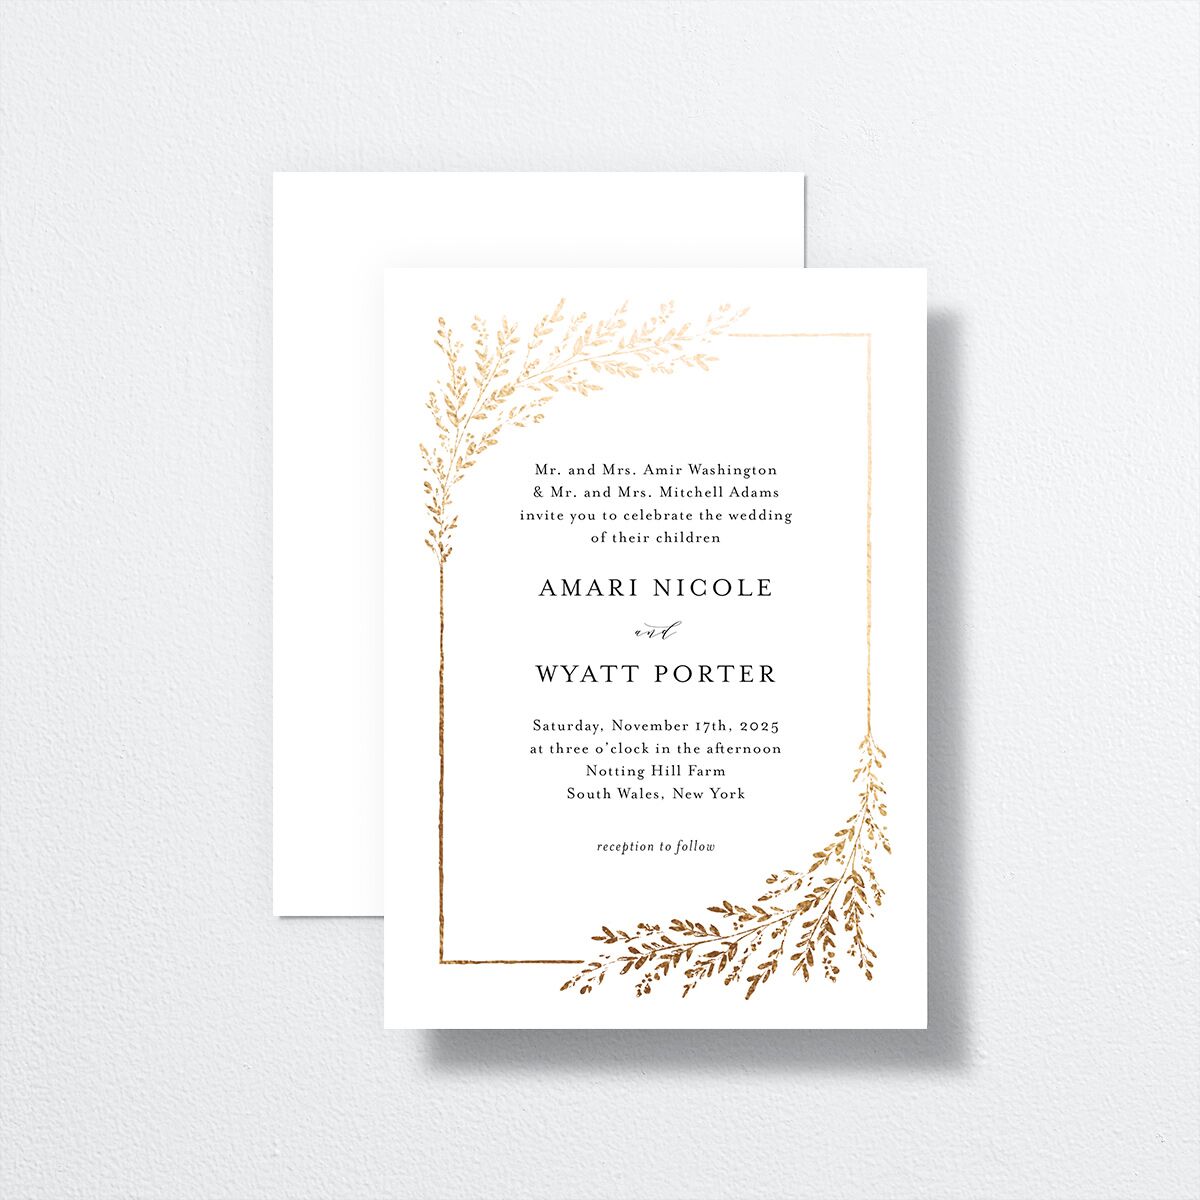 Exquisite Branches Wedding Invitations front-and-back in white